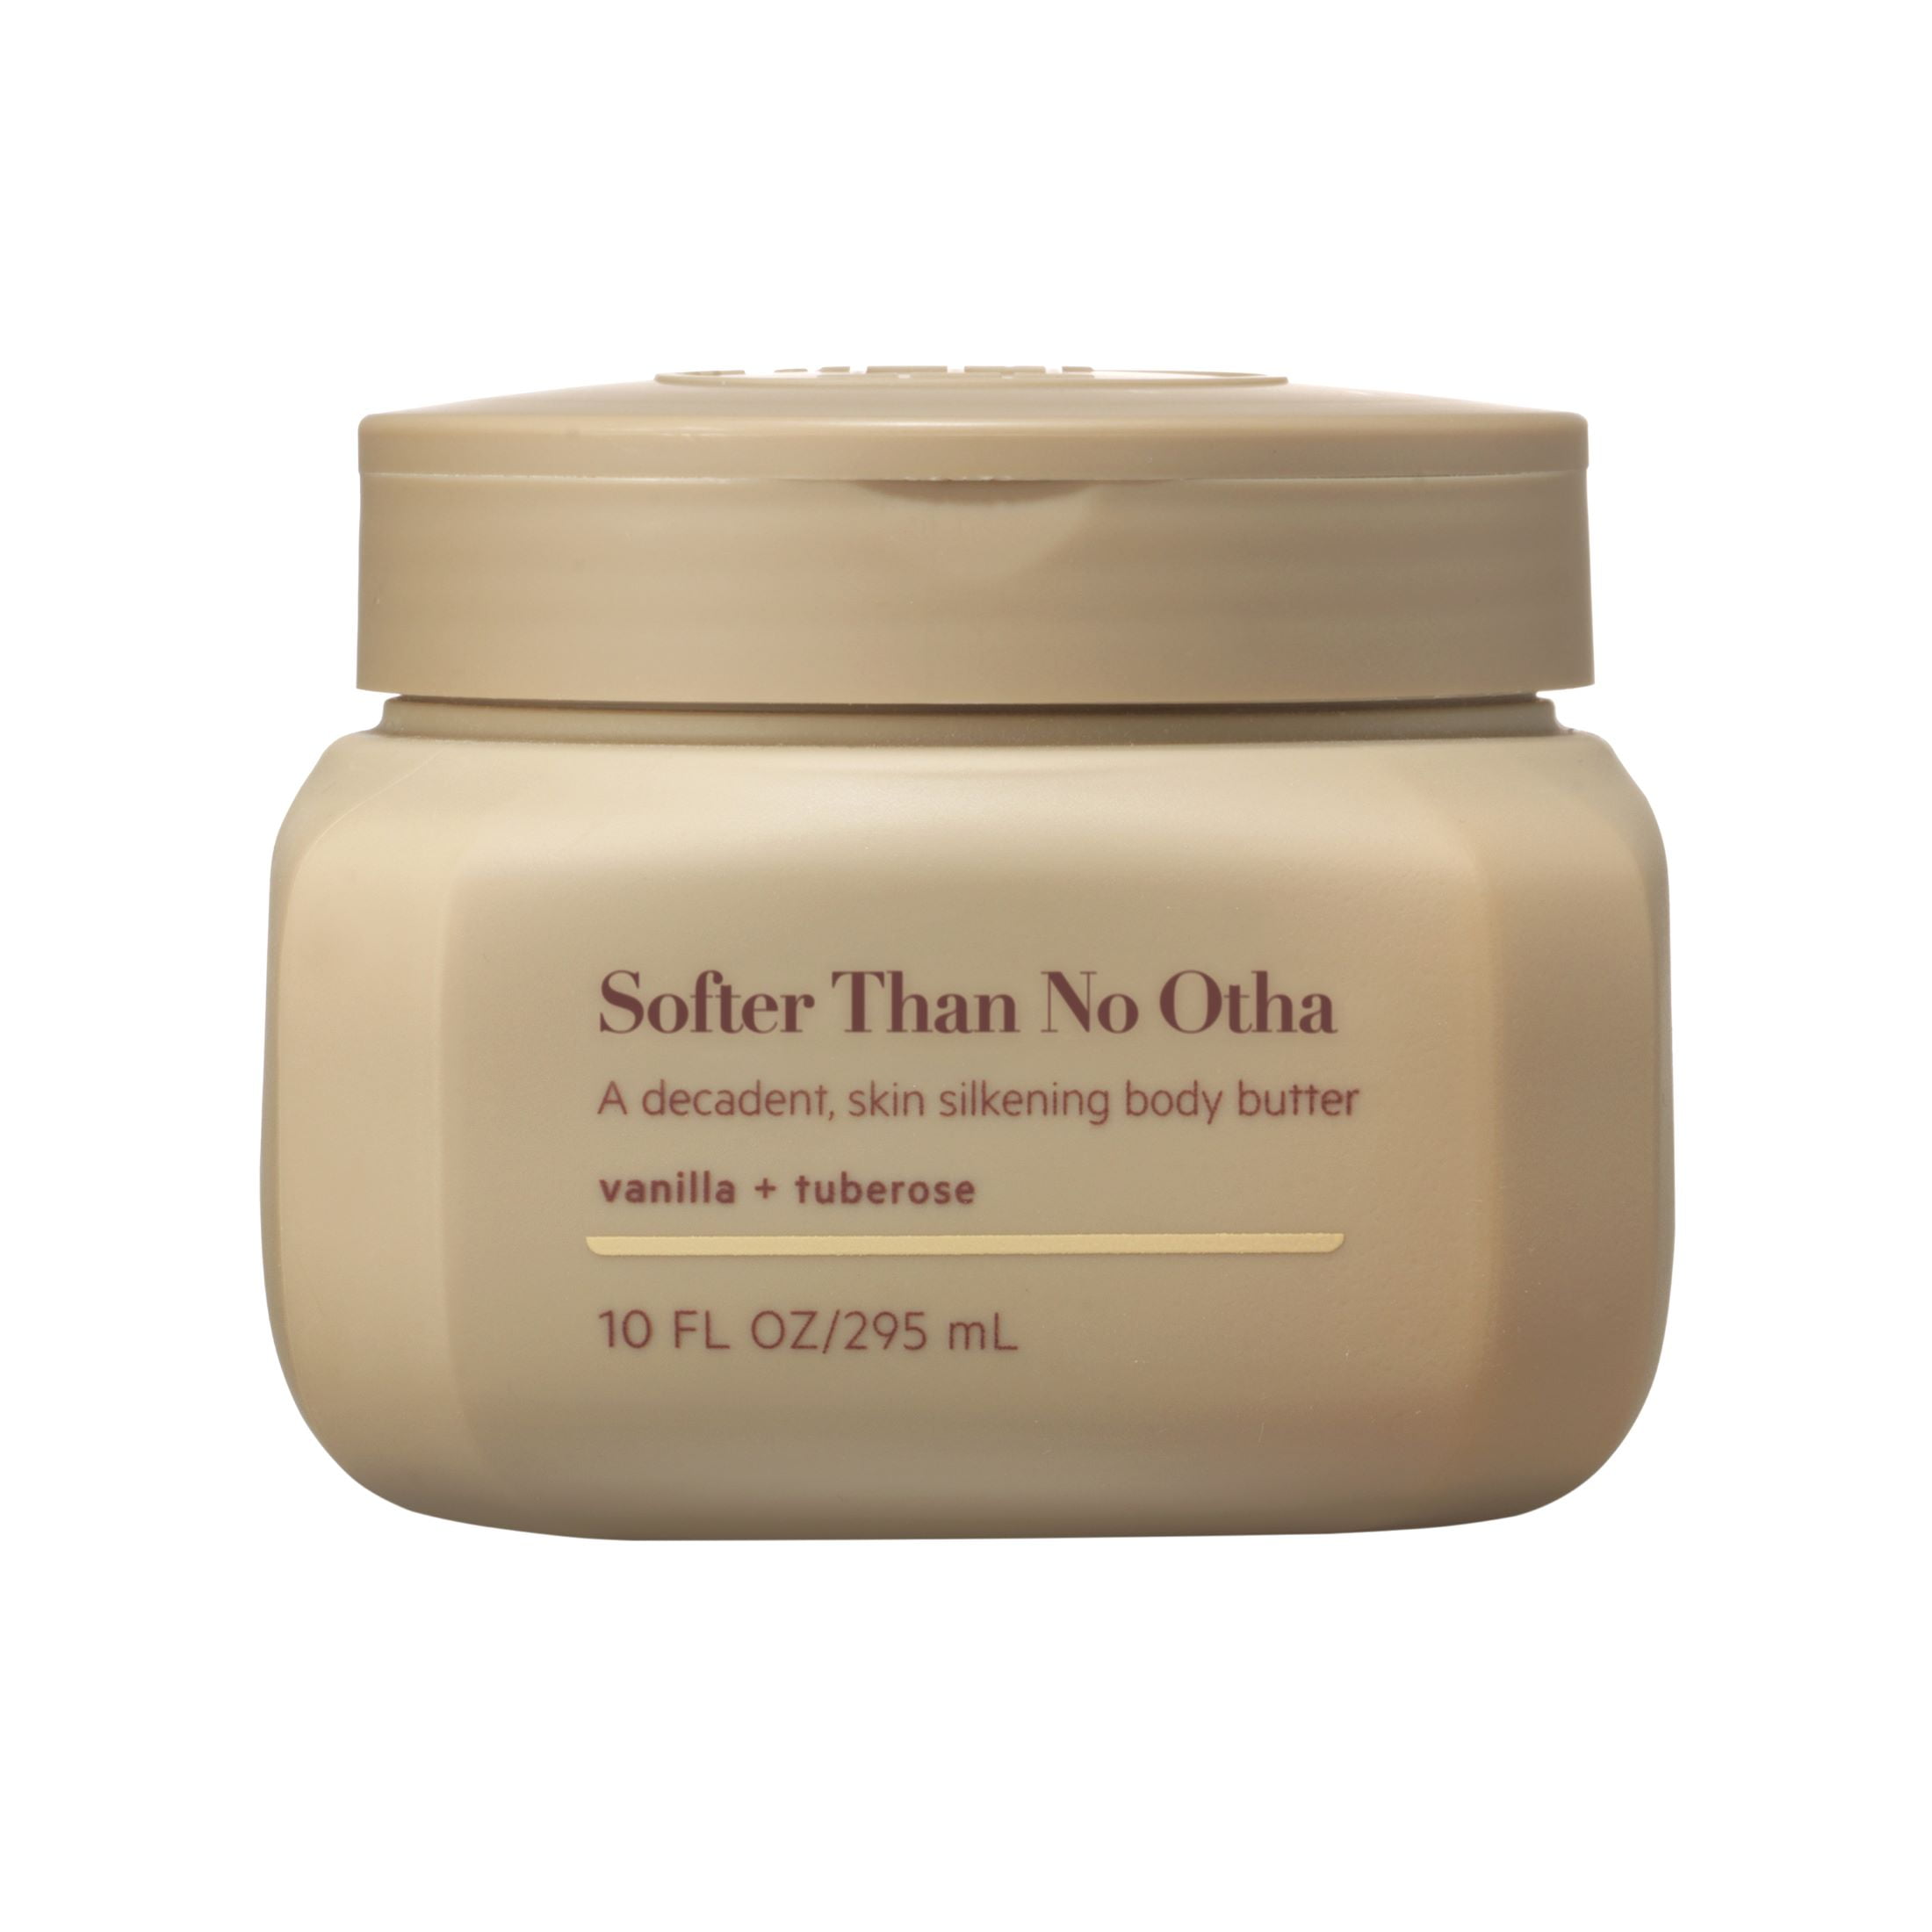 for TPH Dry by Body 10 oz. Otha for with Body Vitamin Than E No & fl. Women Shea & Butter Butter Men, Skin Softer